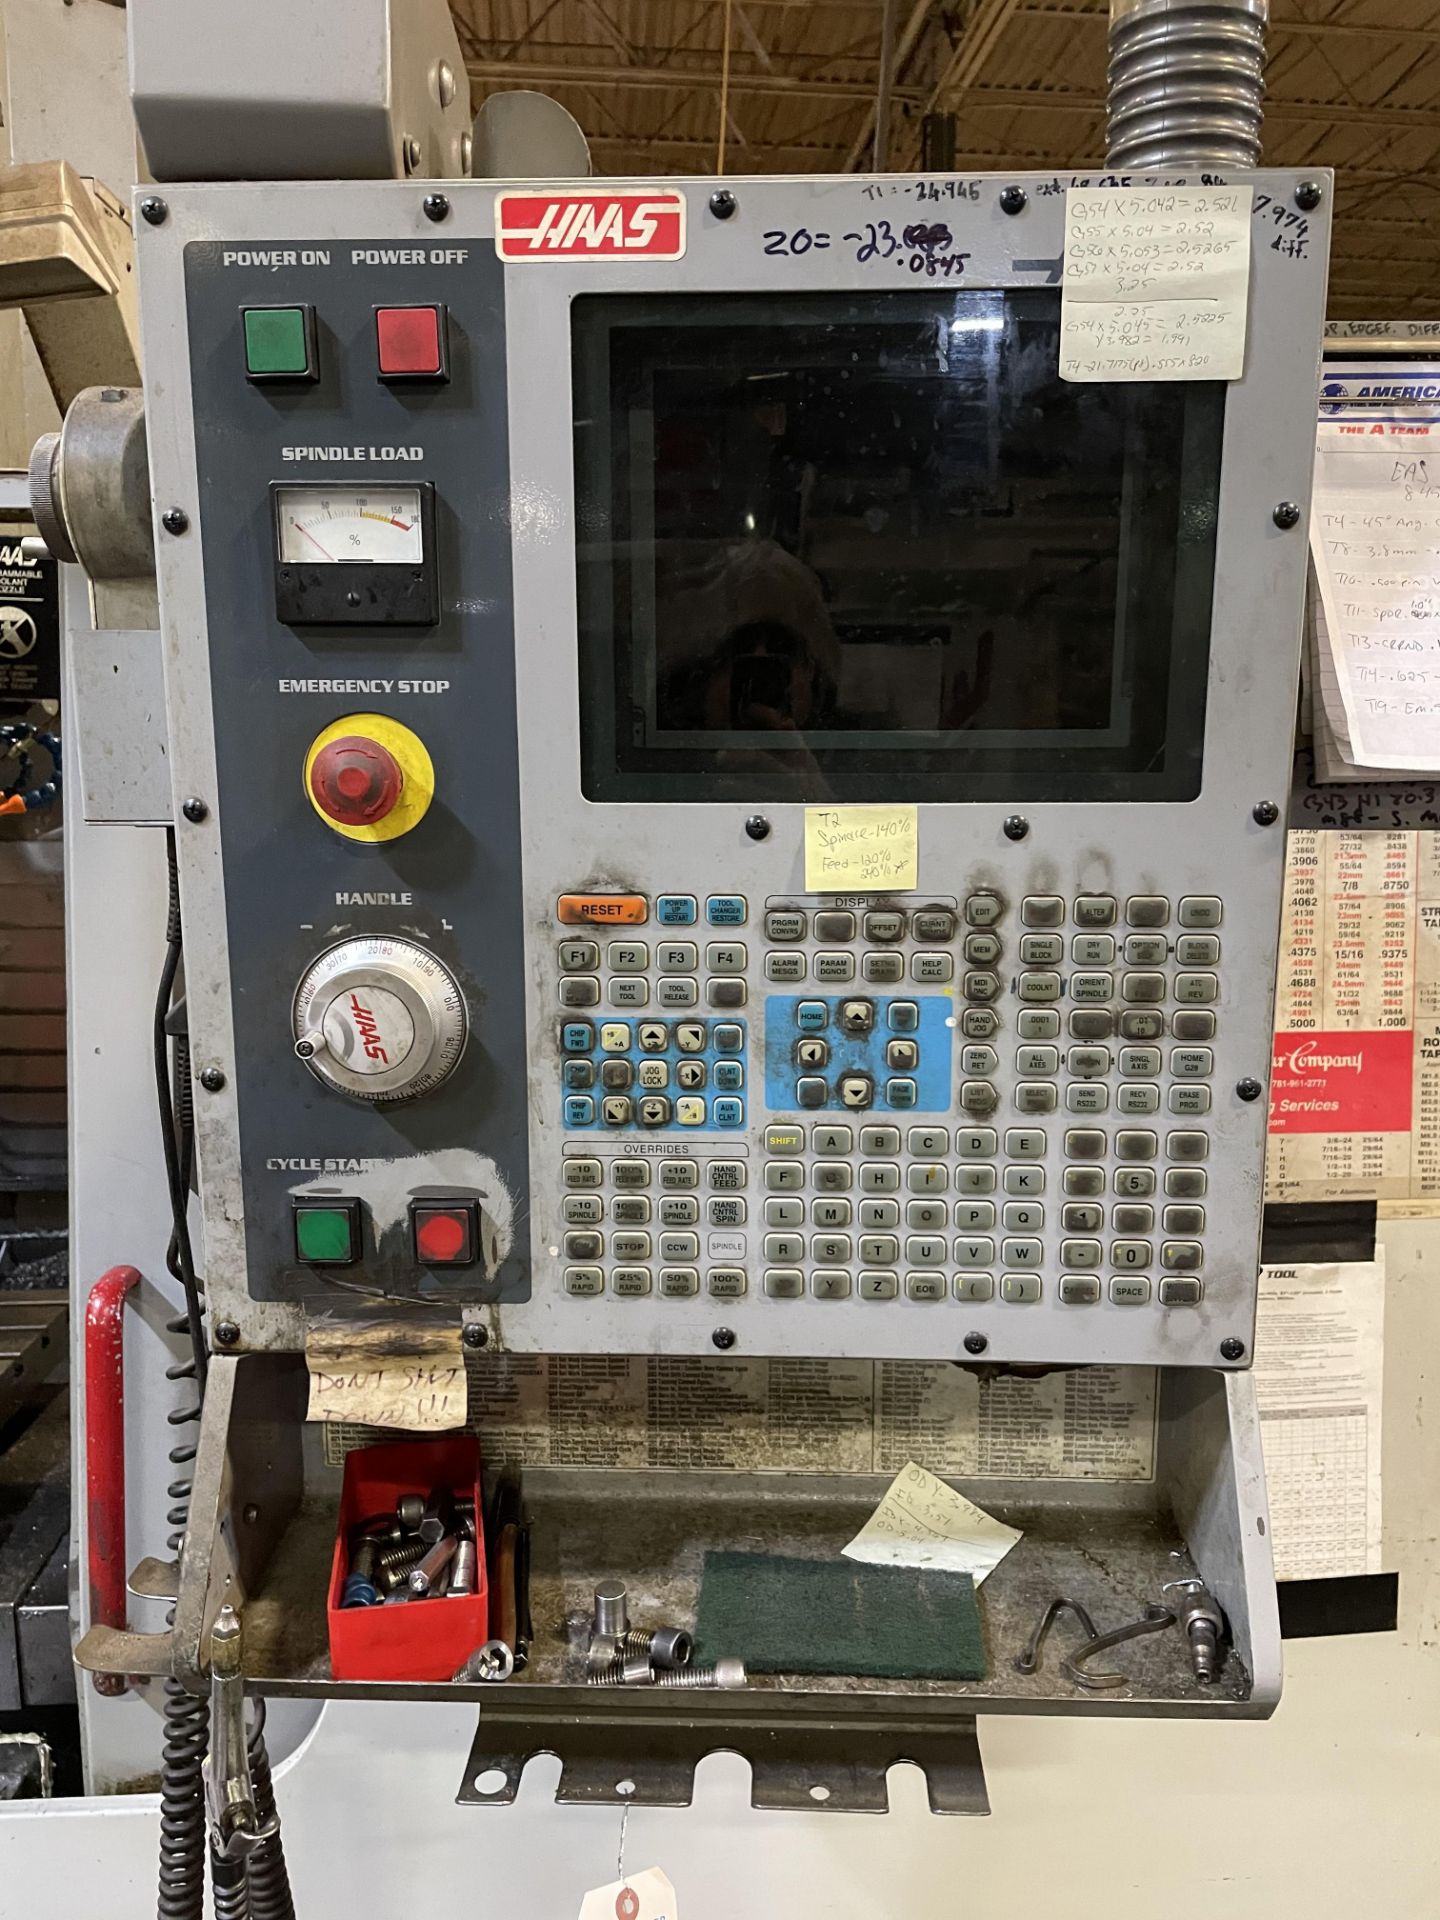 2002 Haas Model VF5B/40, 20 HP, CNC VMC #VOP-D, 52"x23" Table, 24 Tool Holder, 4th Axis, SEE DESC. - Image 4 of 5